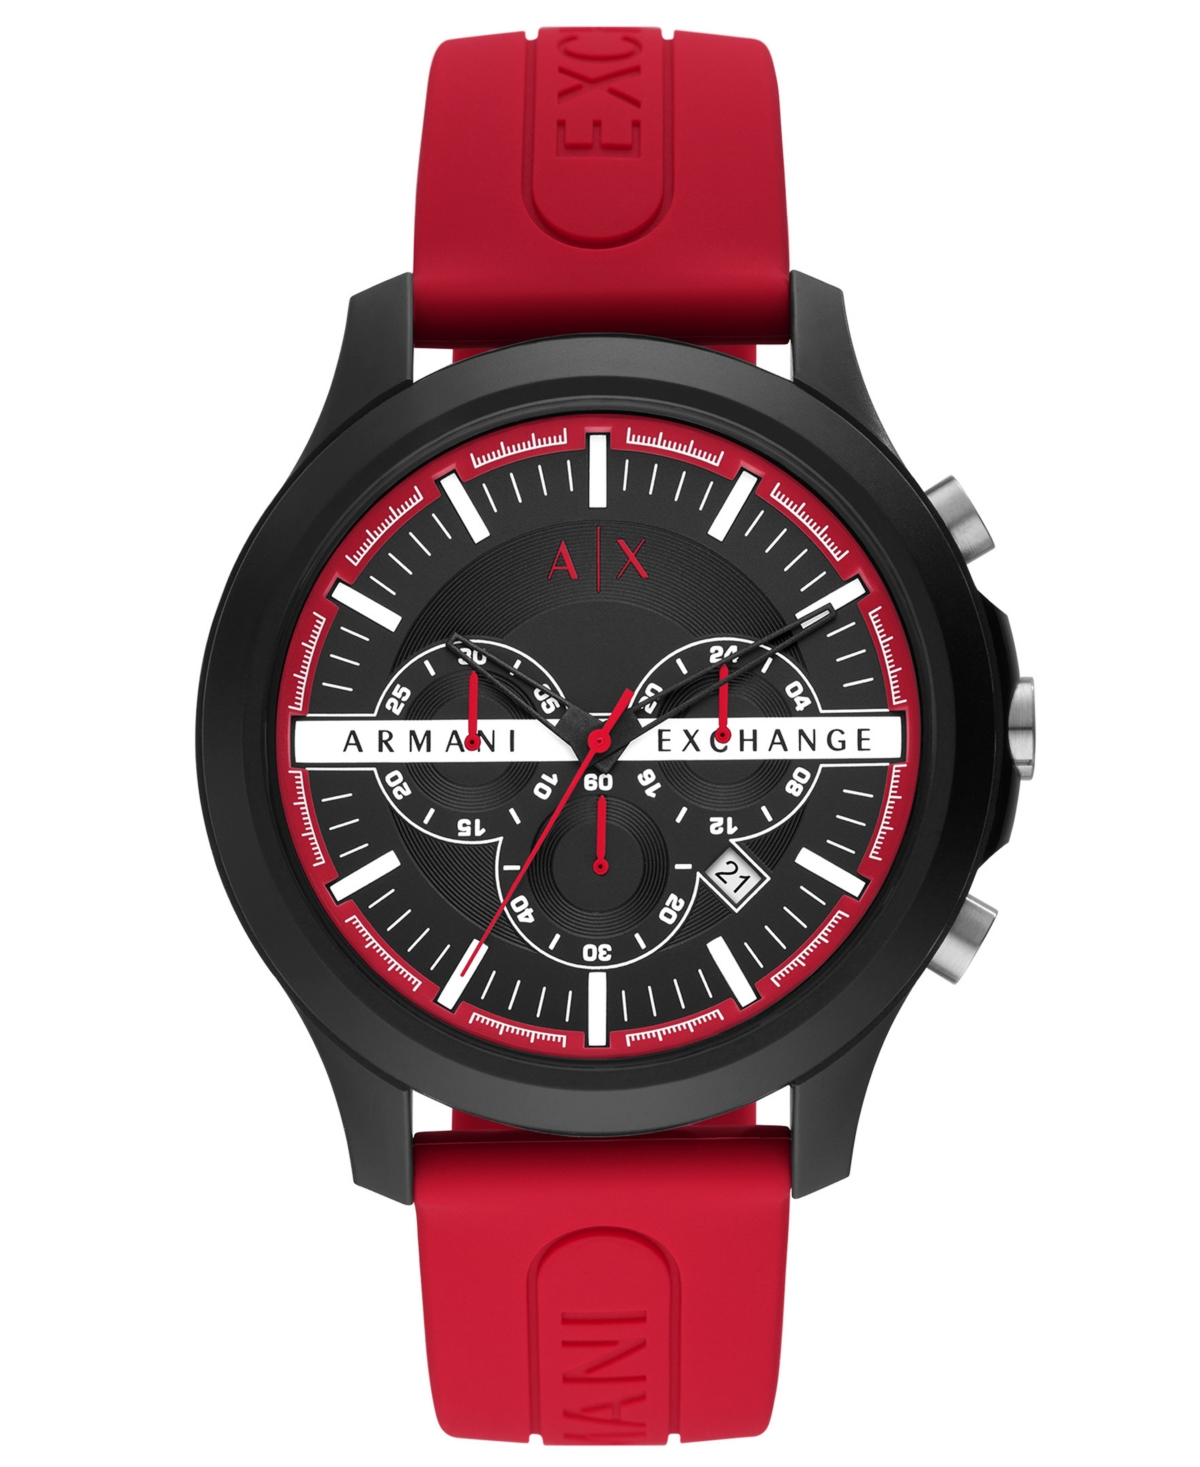 A|X Armani Exchange Men's Chronograph Red Silicone Strap Watch 46mm &  Reviews - All Watches - Jewelry & Watches - Macy's